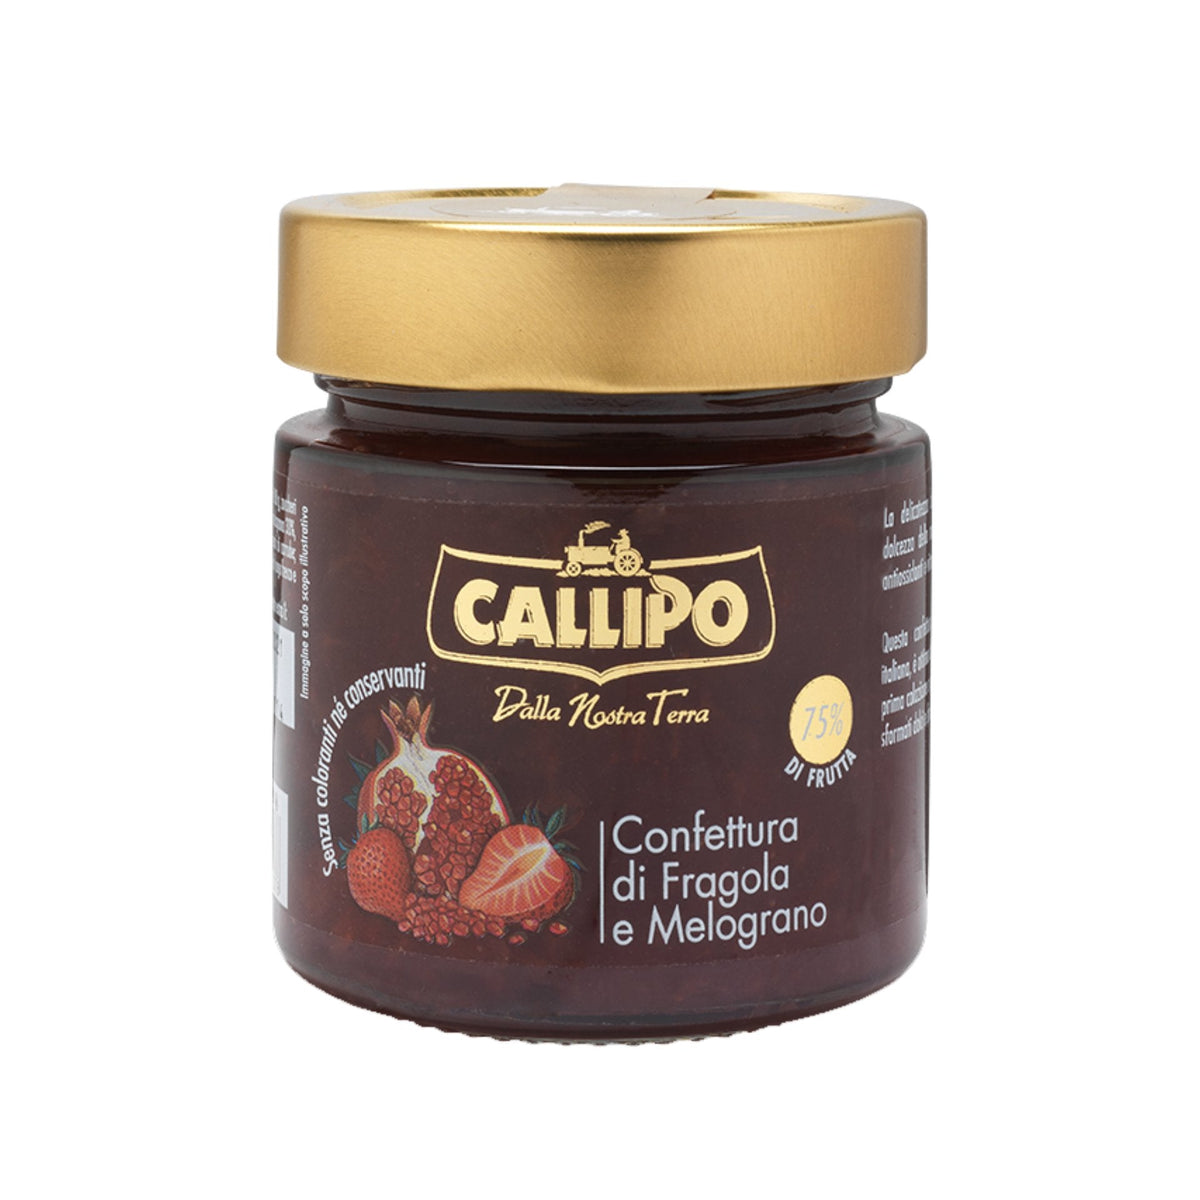 Callipo Extra Strawberry &amp; Pomegranate Jam 280g  | Imported and distributed in the UK by Just Gourmet Foods